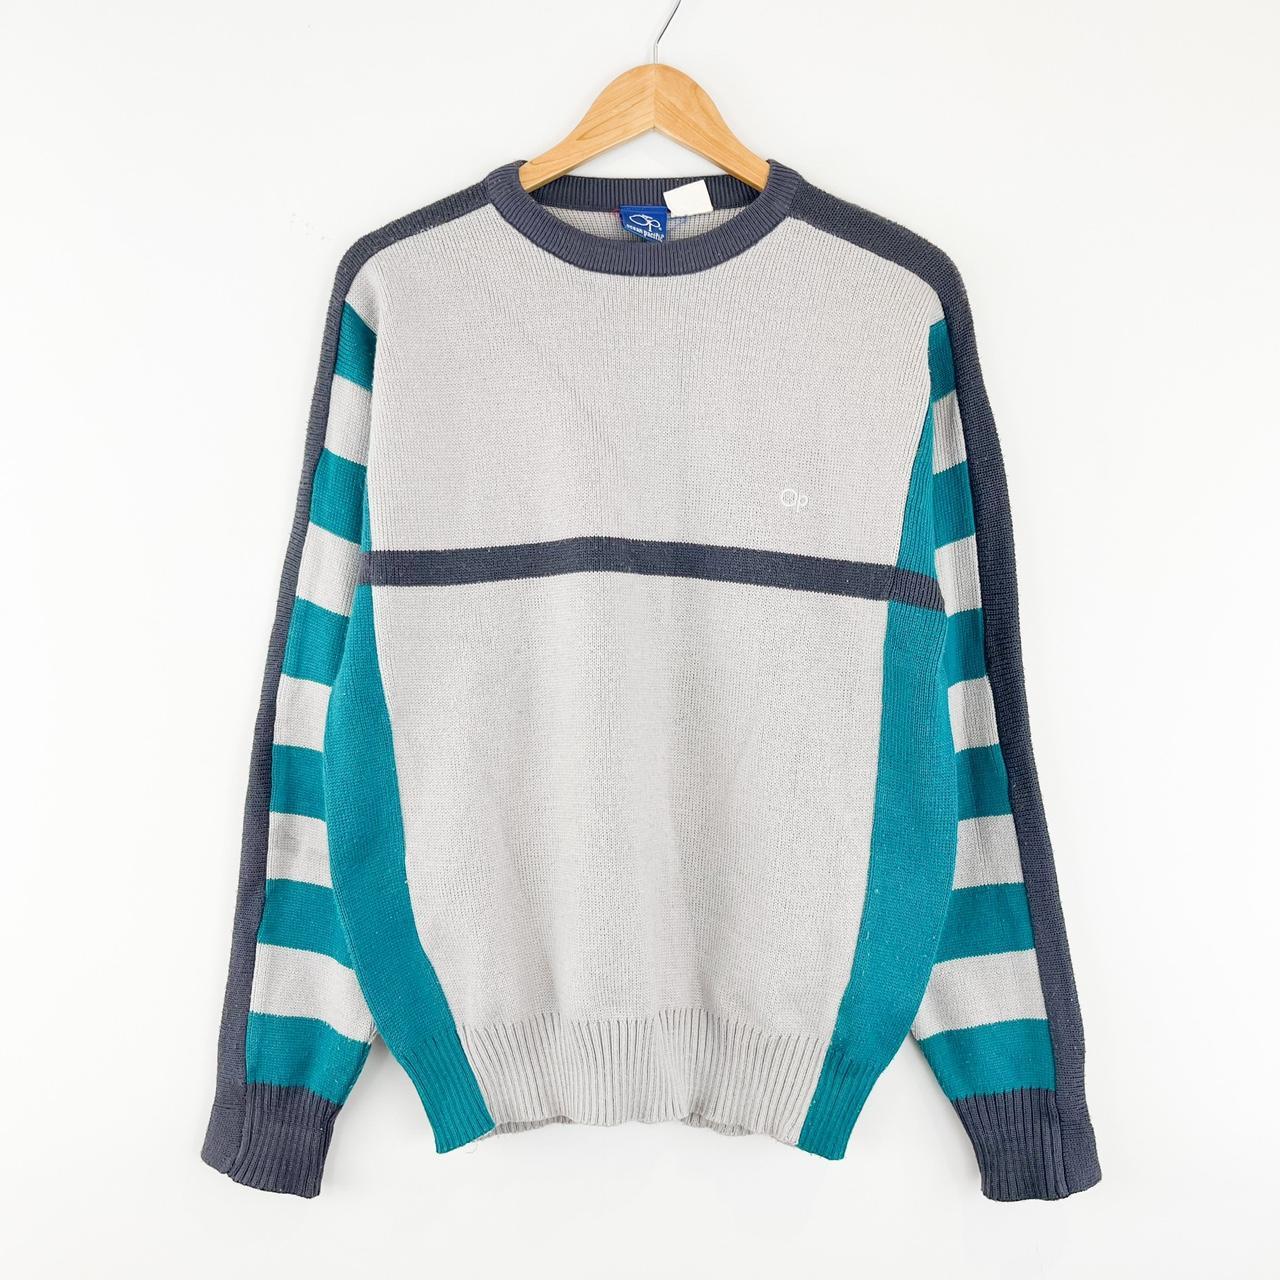 Product Image 1 - vintage ocean pacific striped sweater

appears